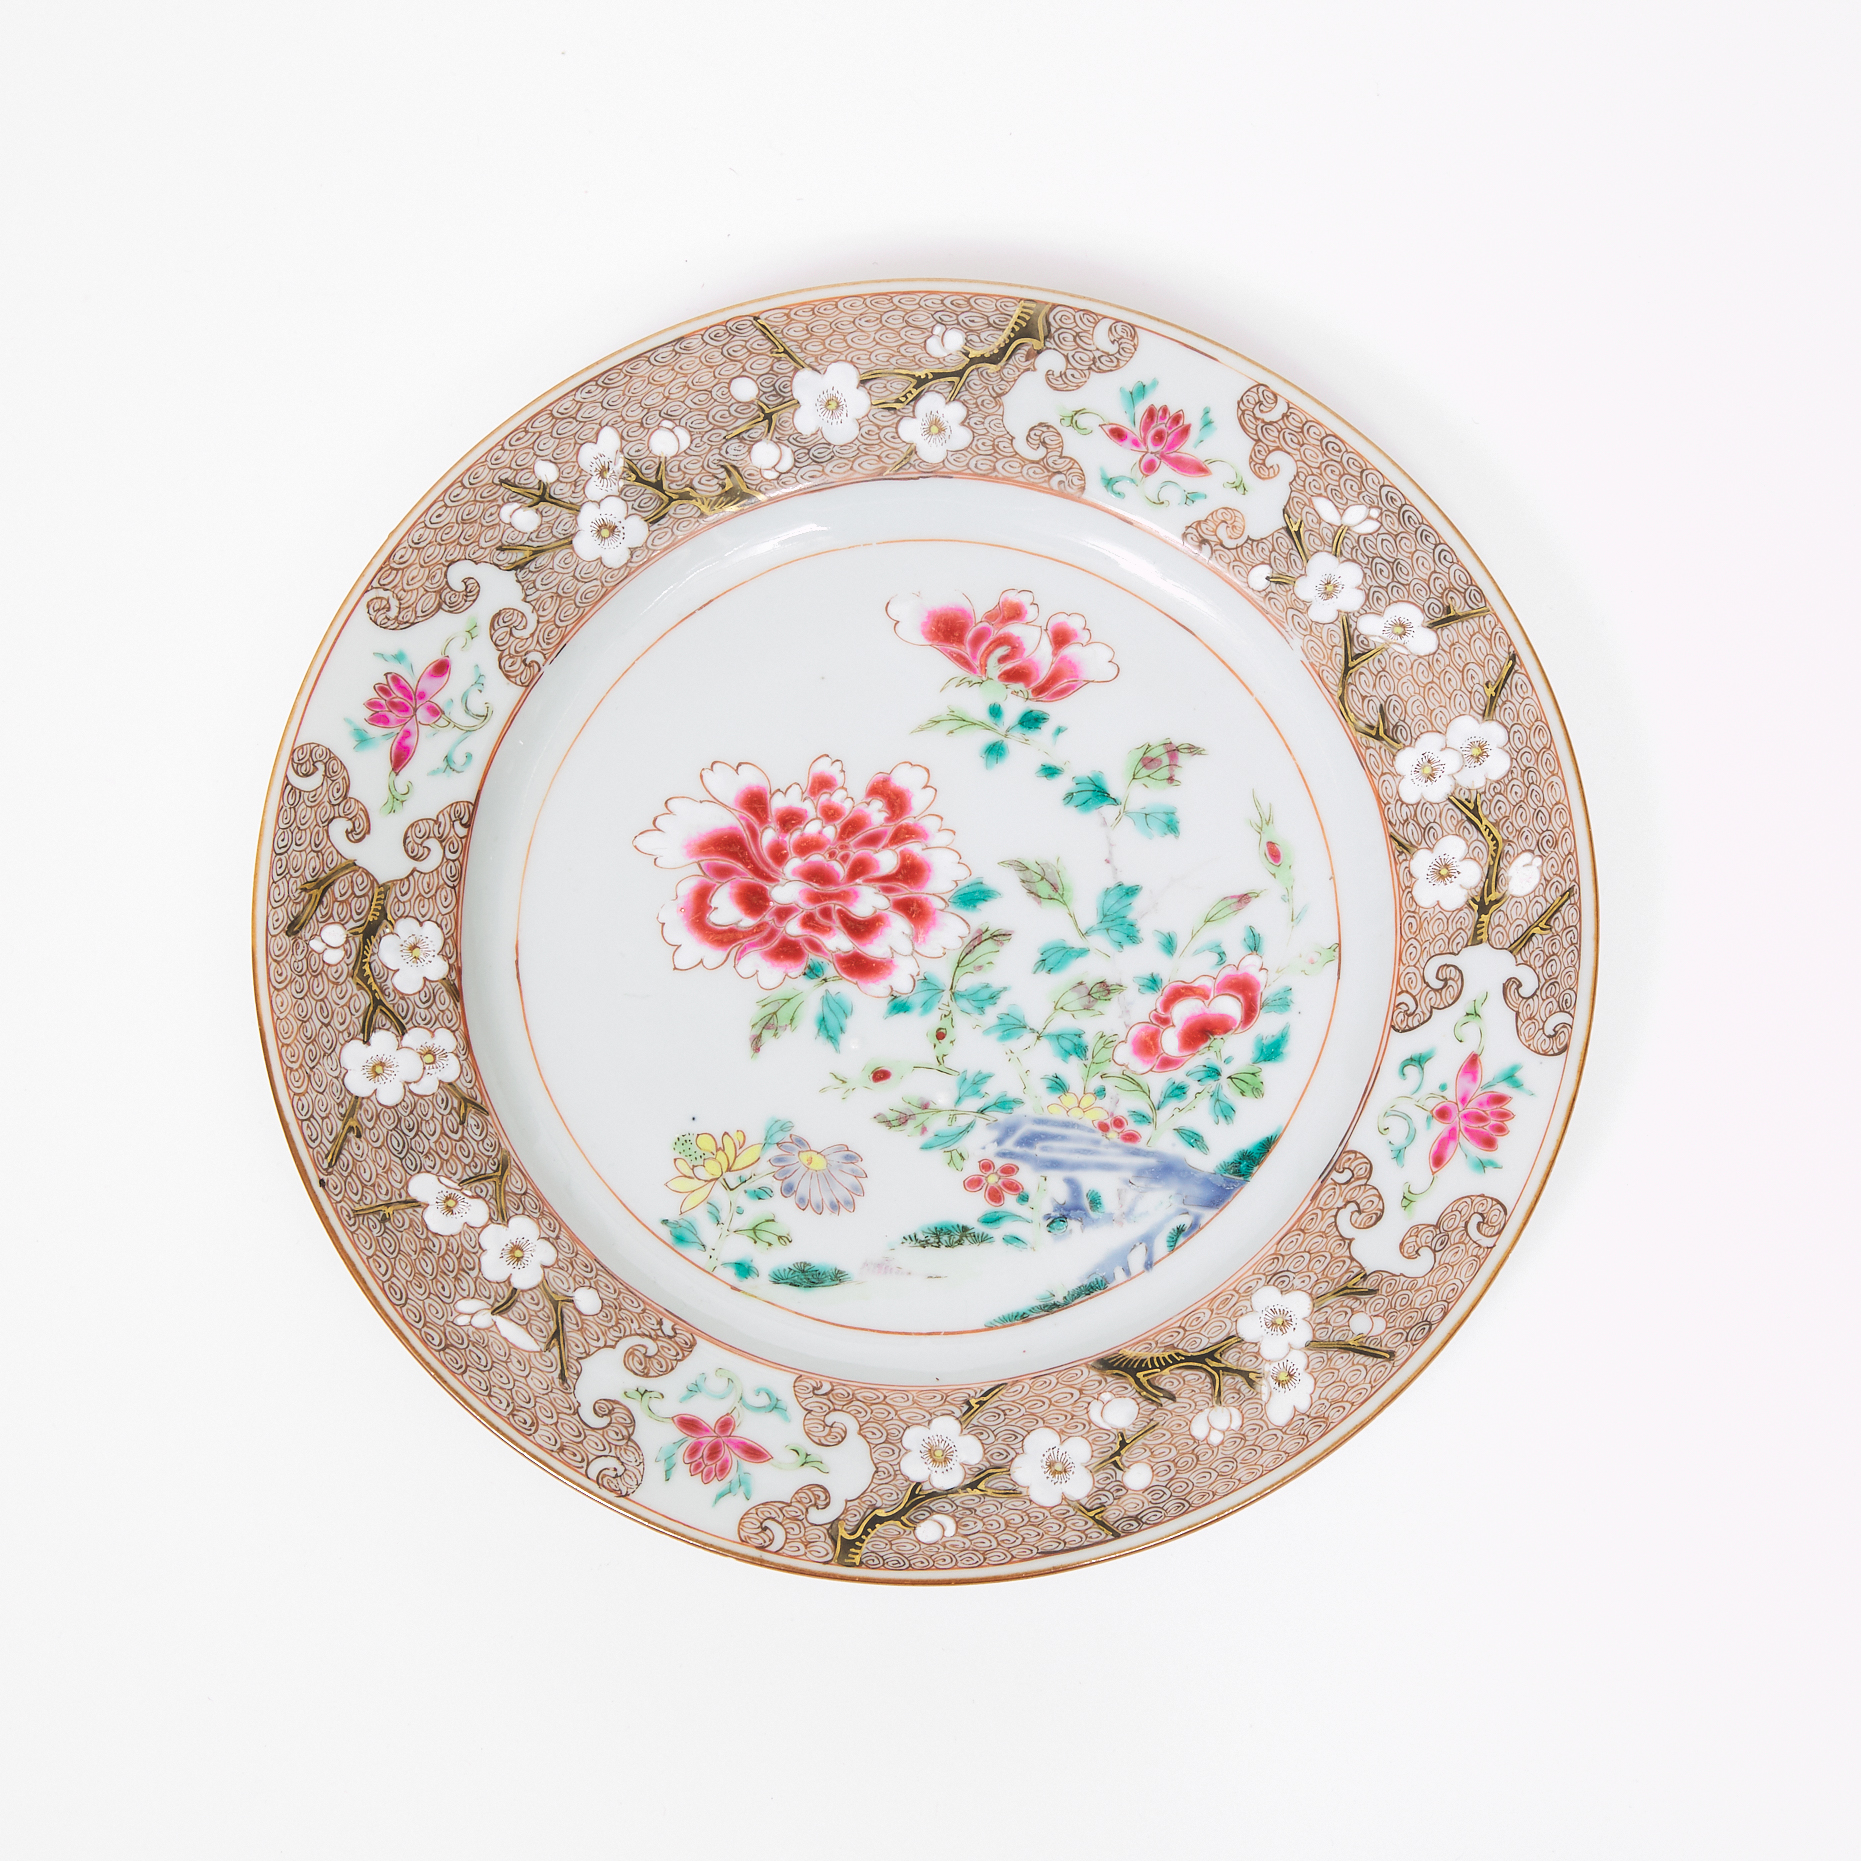 A Well-Painted Famille Rose Plate with Peonies, Qianlong Period, 18th Century